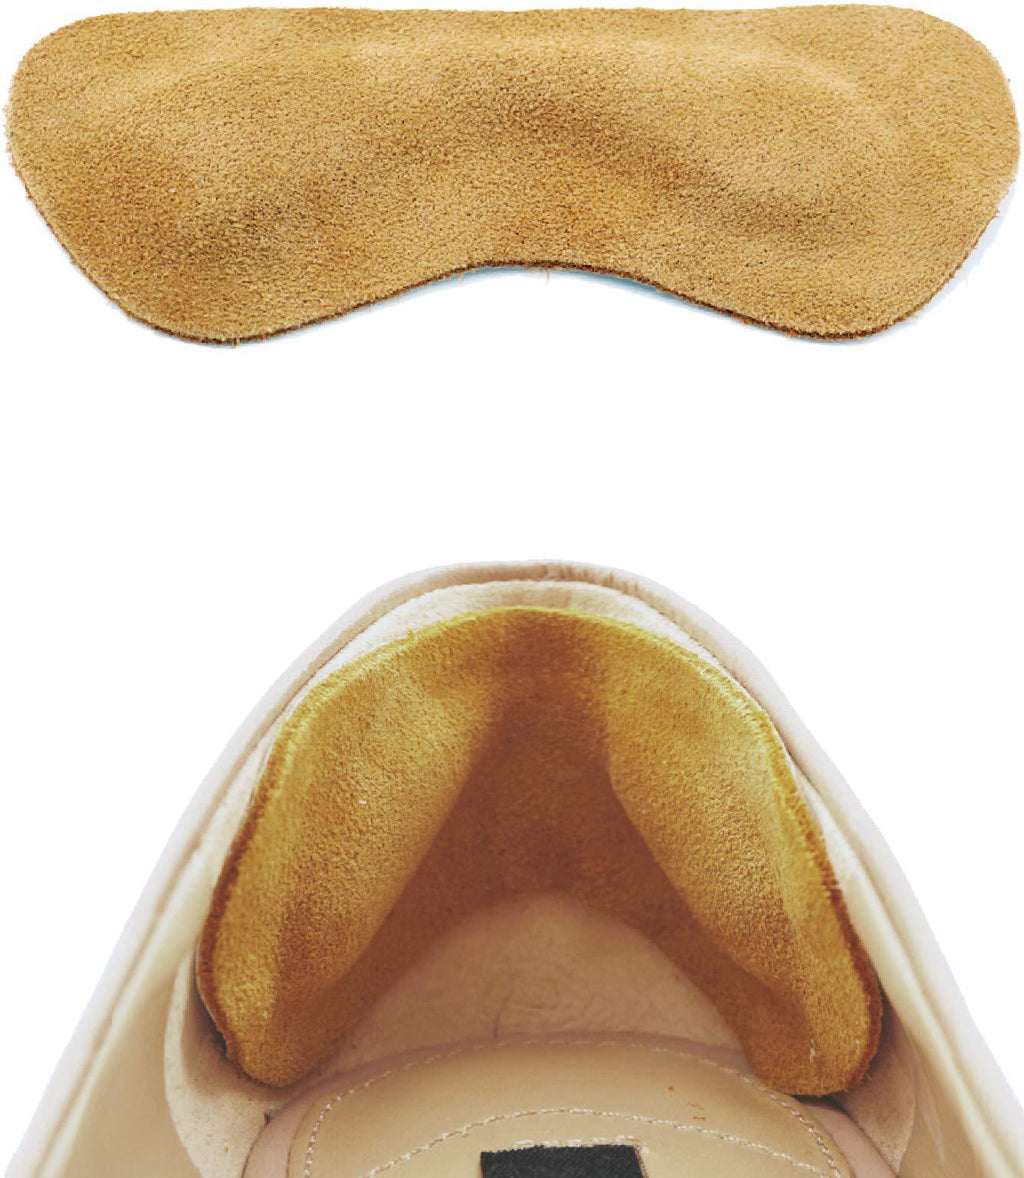 [Australia] - Leather Heel Grips Liner Cushions Inserts for Loose Shoes, Improved Shoe Fit and Comfort, Khaki,0.28inch Thick 2 Pair 1 